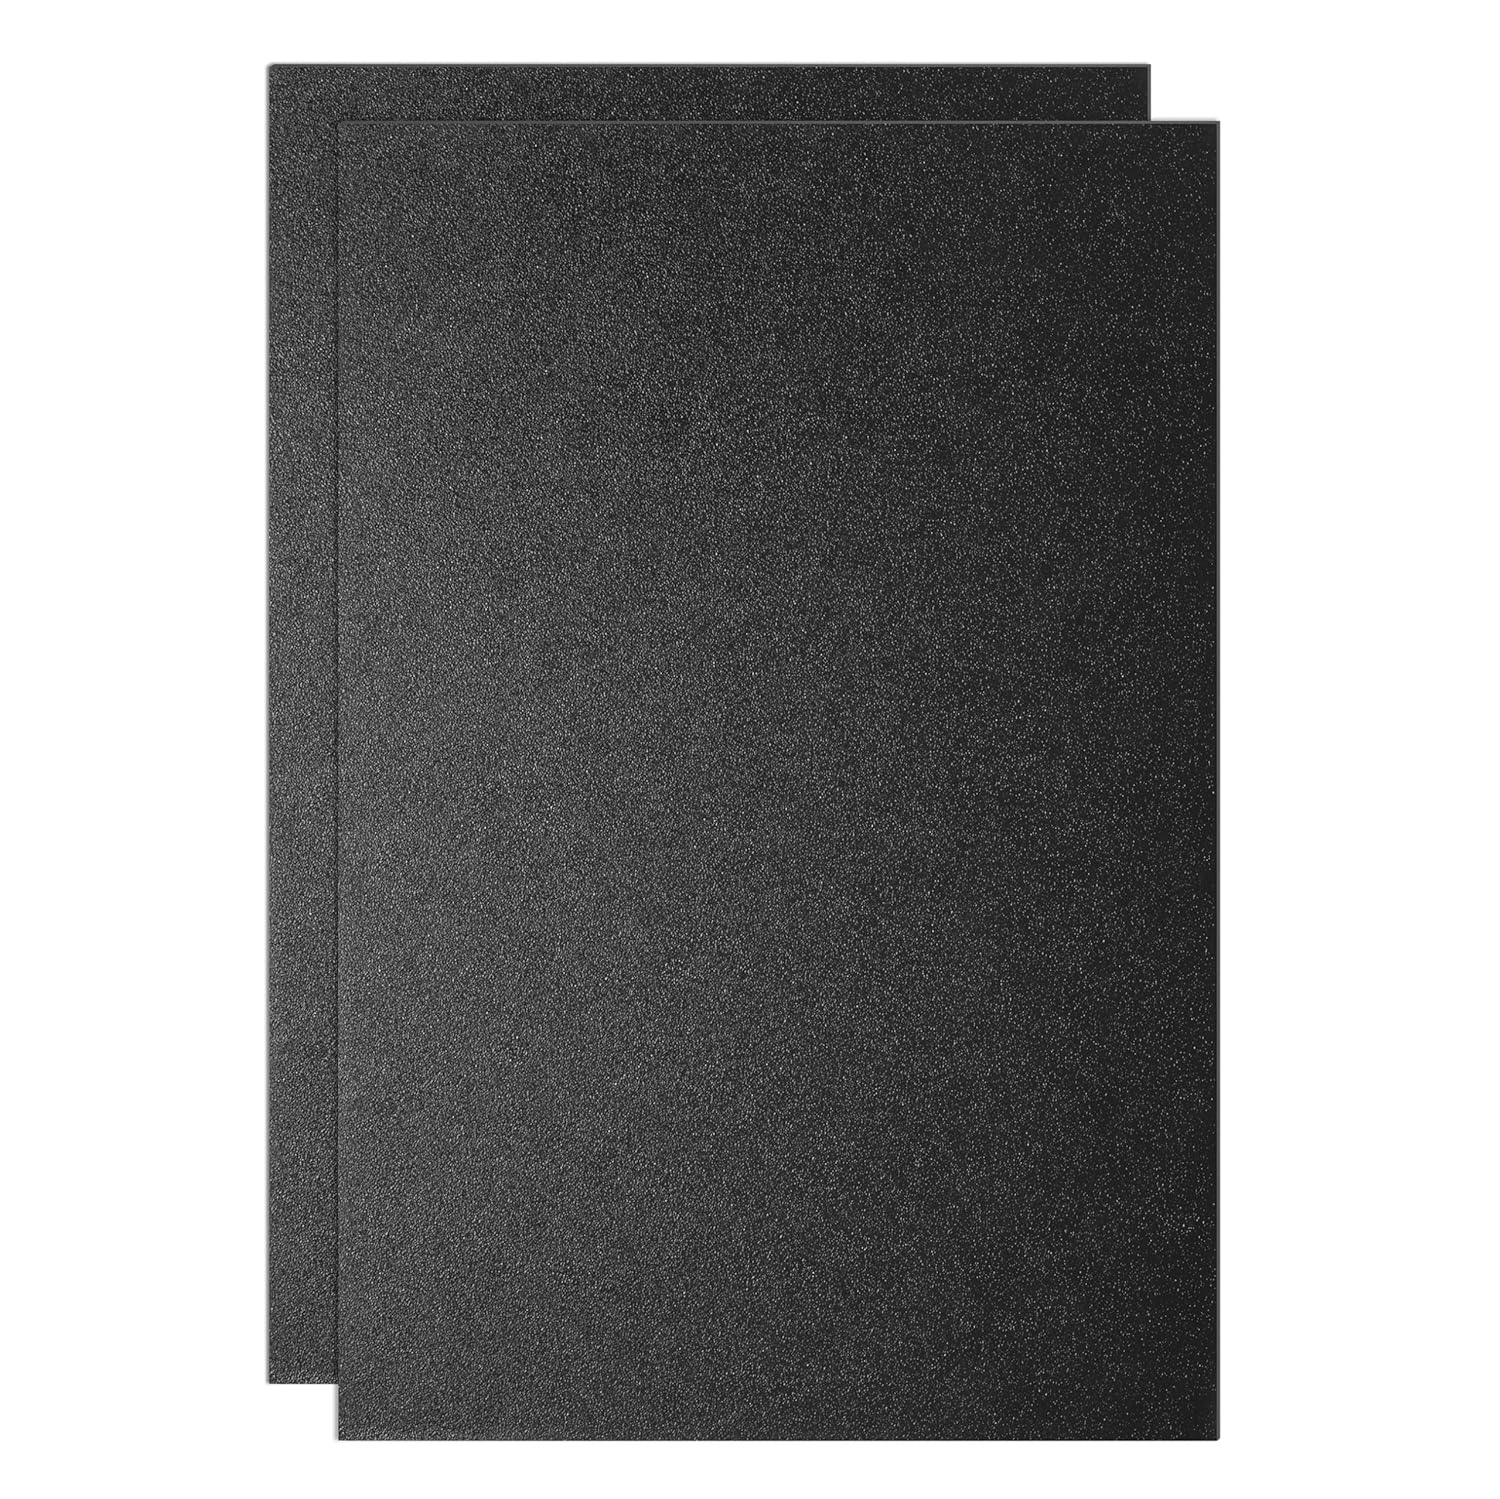 Paidu ABS Plastic Sheet 12" x 16" x 1/8" Thick 3mm Black Rigid Thermoplastic Sheet Moldable Plastic Panel for Crafts DIY Projects Textured & Smooth Finish Pack of 2